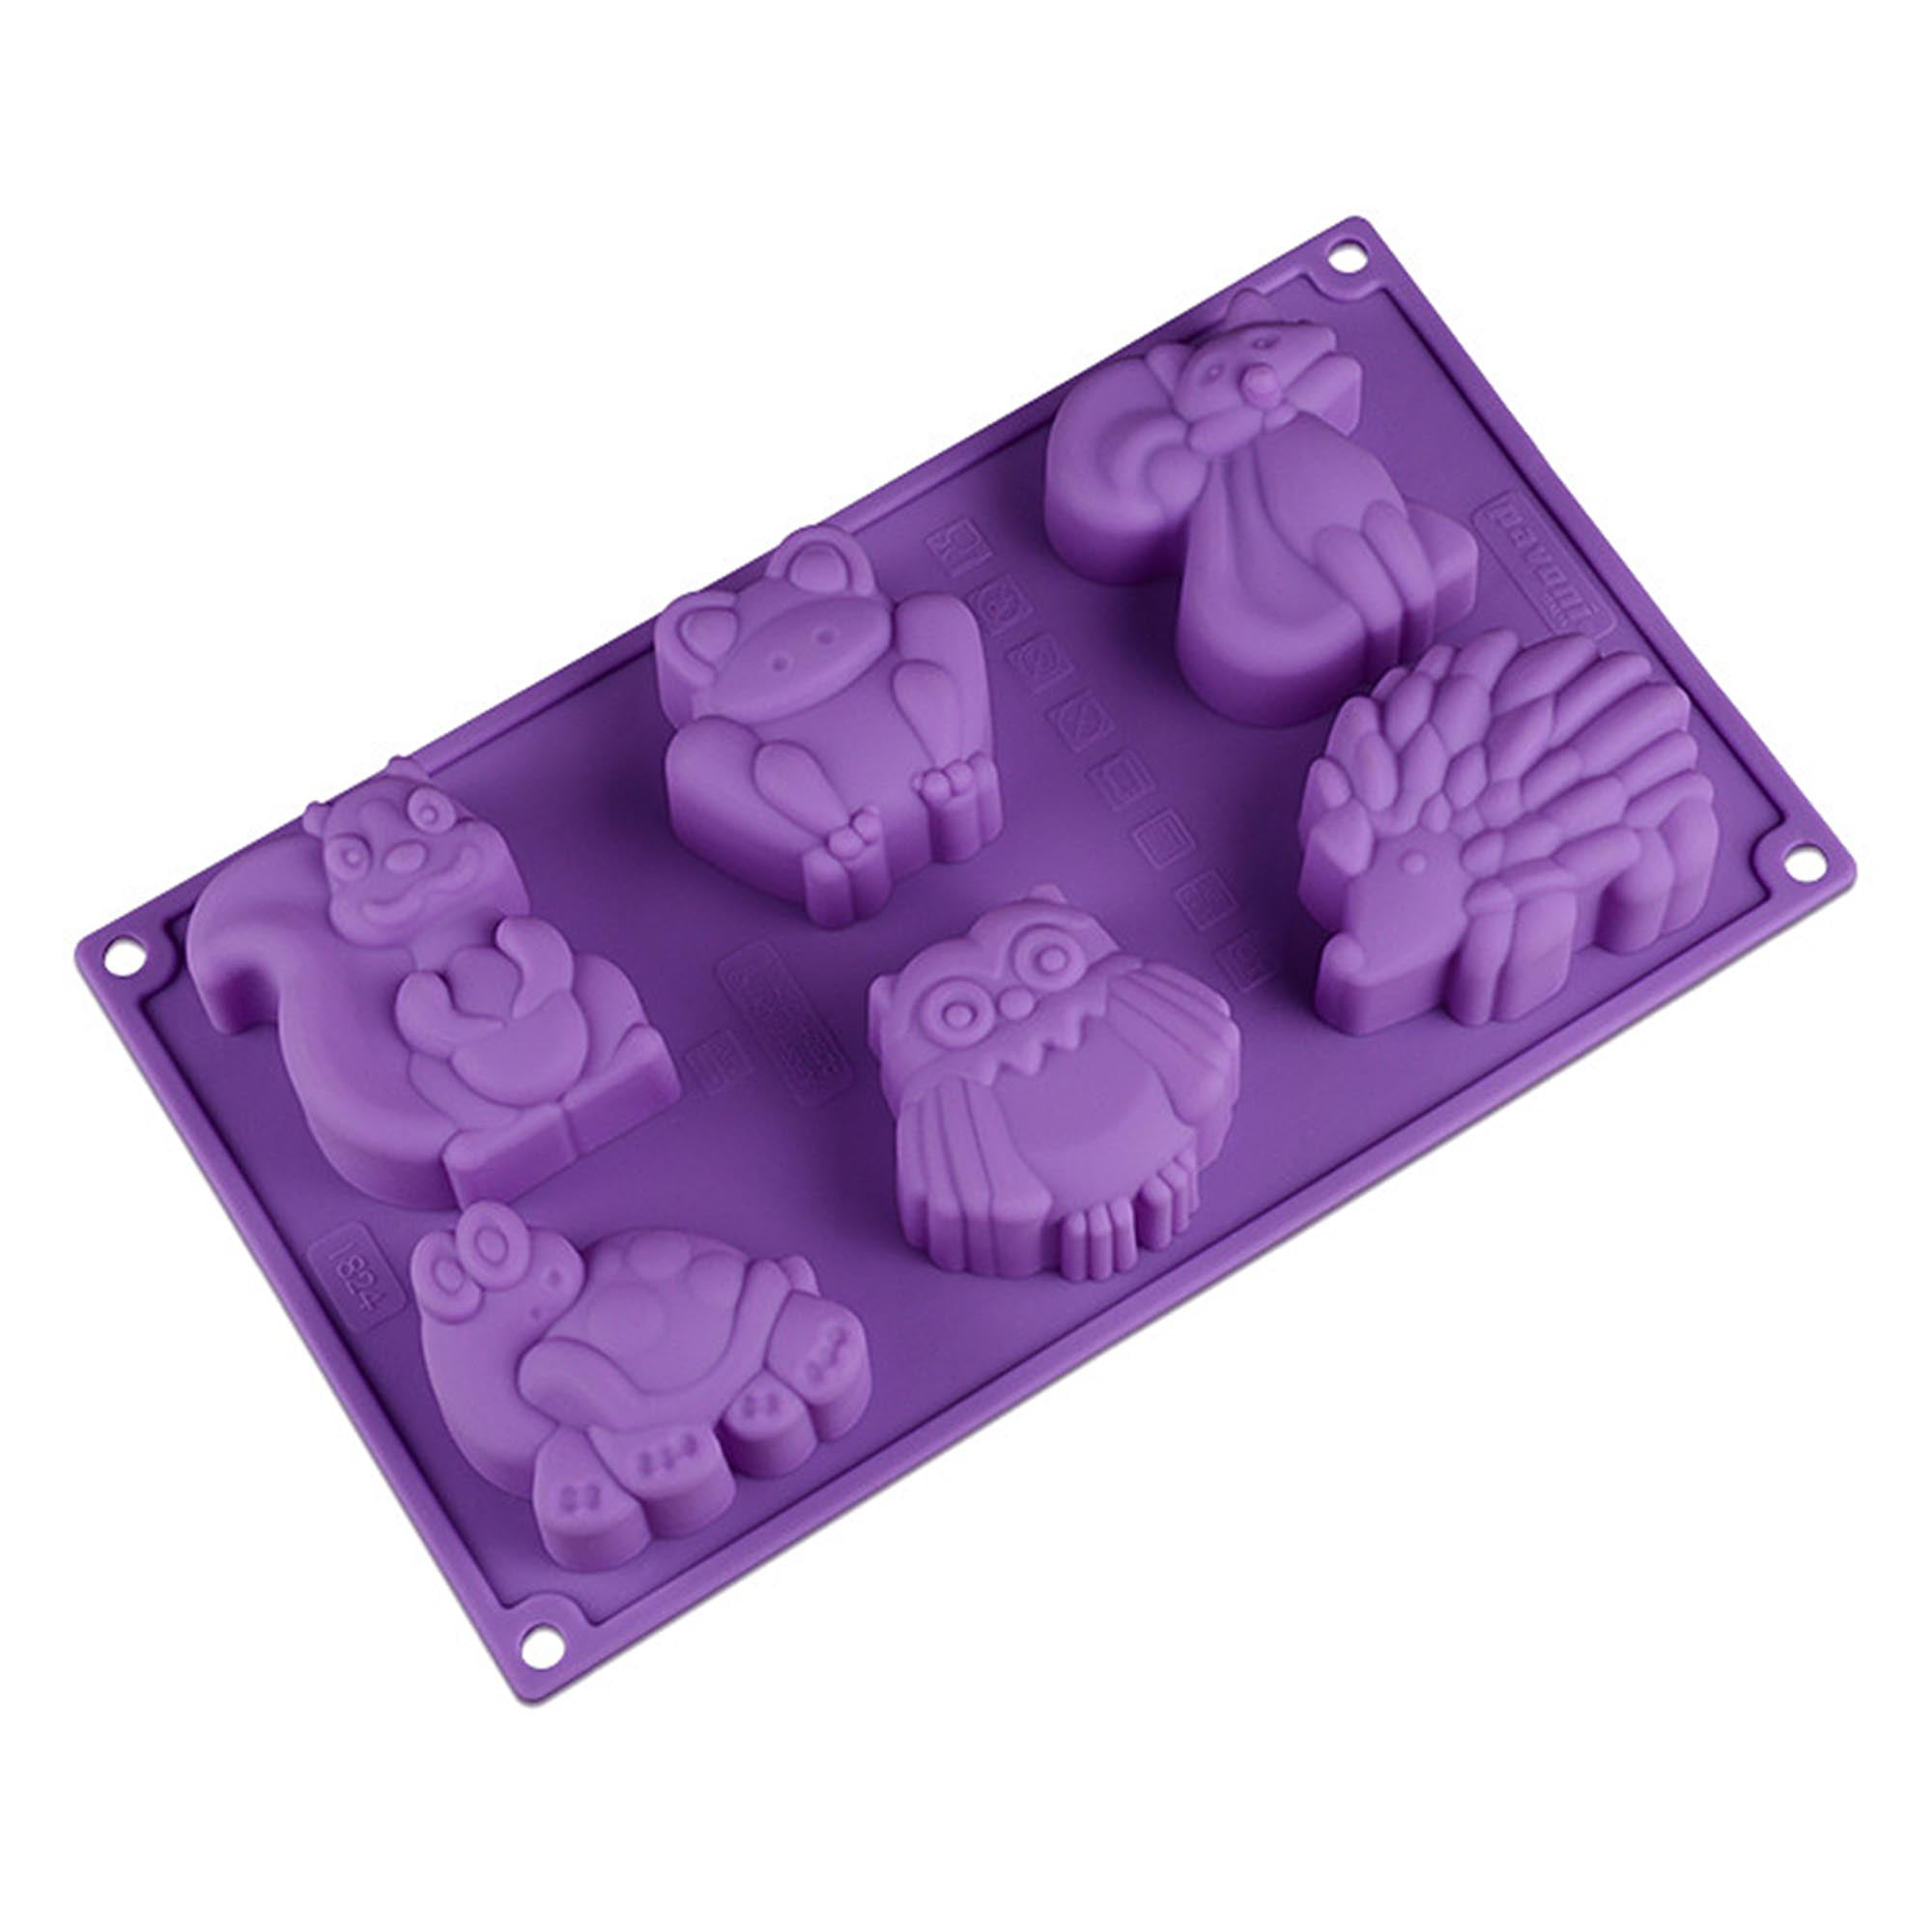 Dylandy Cake Mould Hot Air Balloon Silicone Mold Fondant Biscuit Jelly Mould Craft DIY Baking 3D Mold Cake Decorating Tools